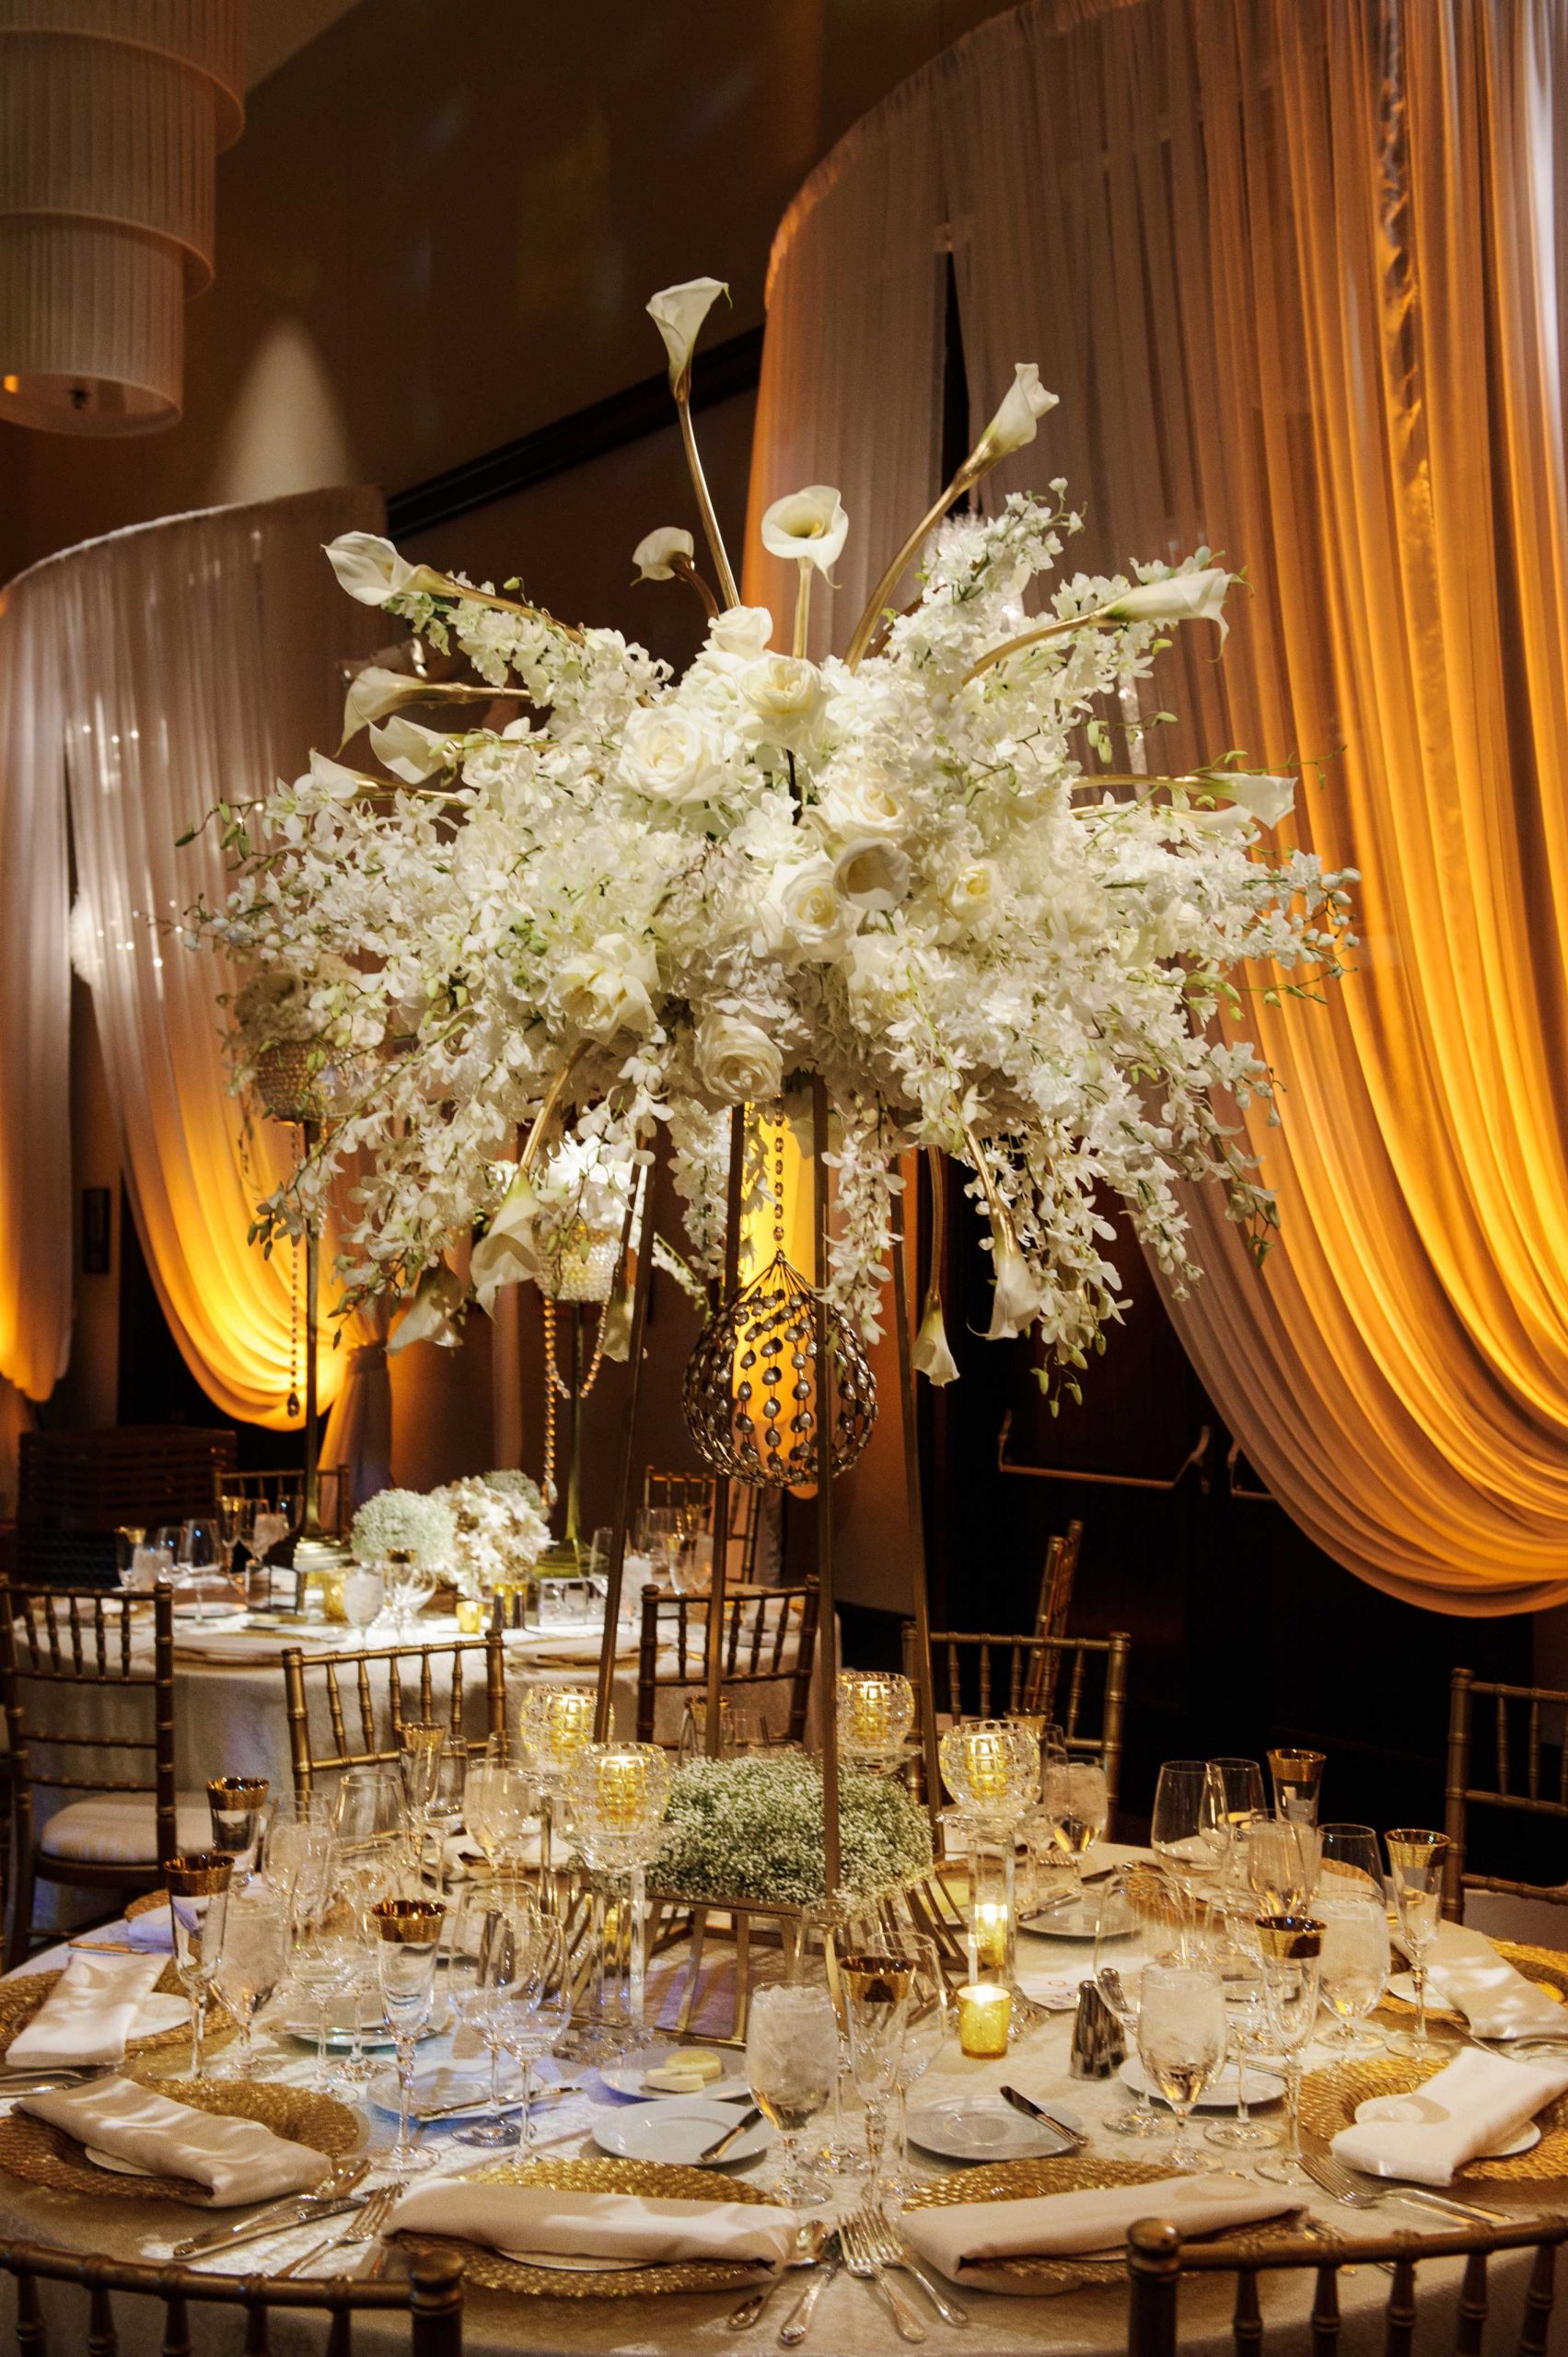 New Year Centerpiece Ideas
 Wedding Ideas Tall Centerpieces from Sophisticated